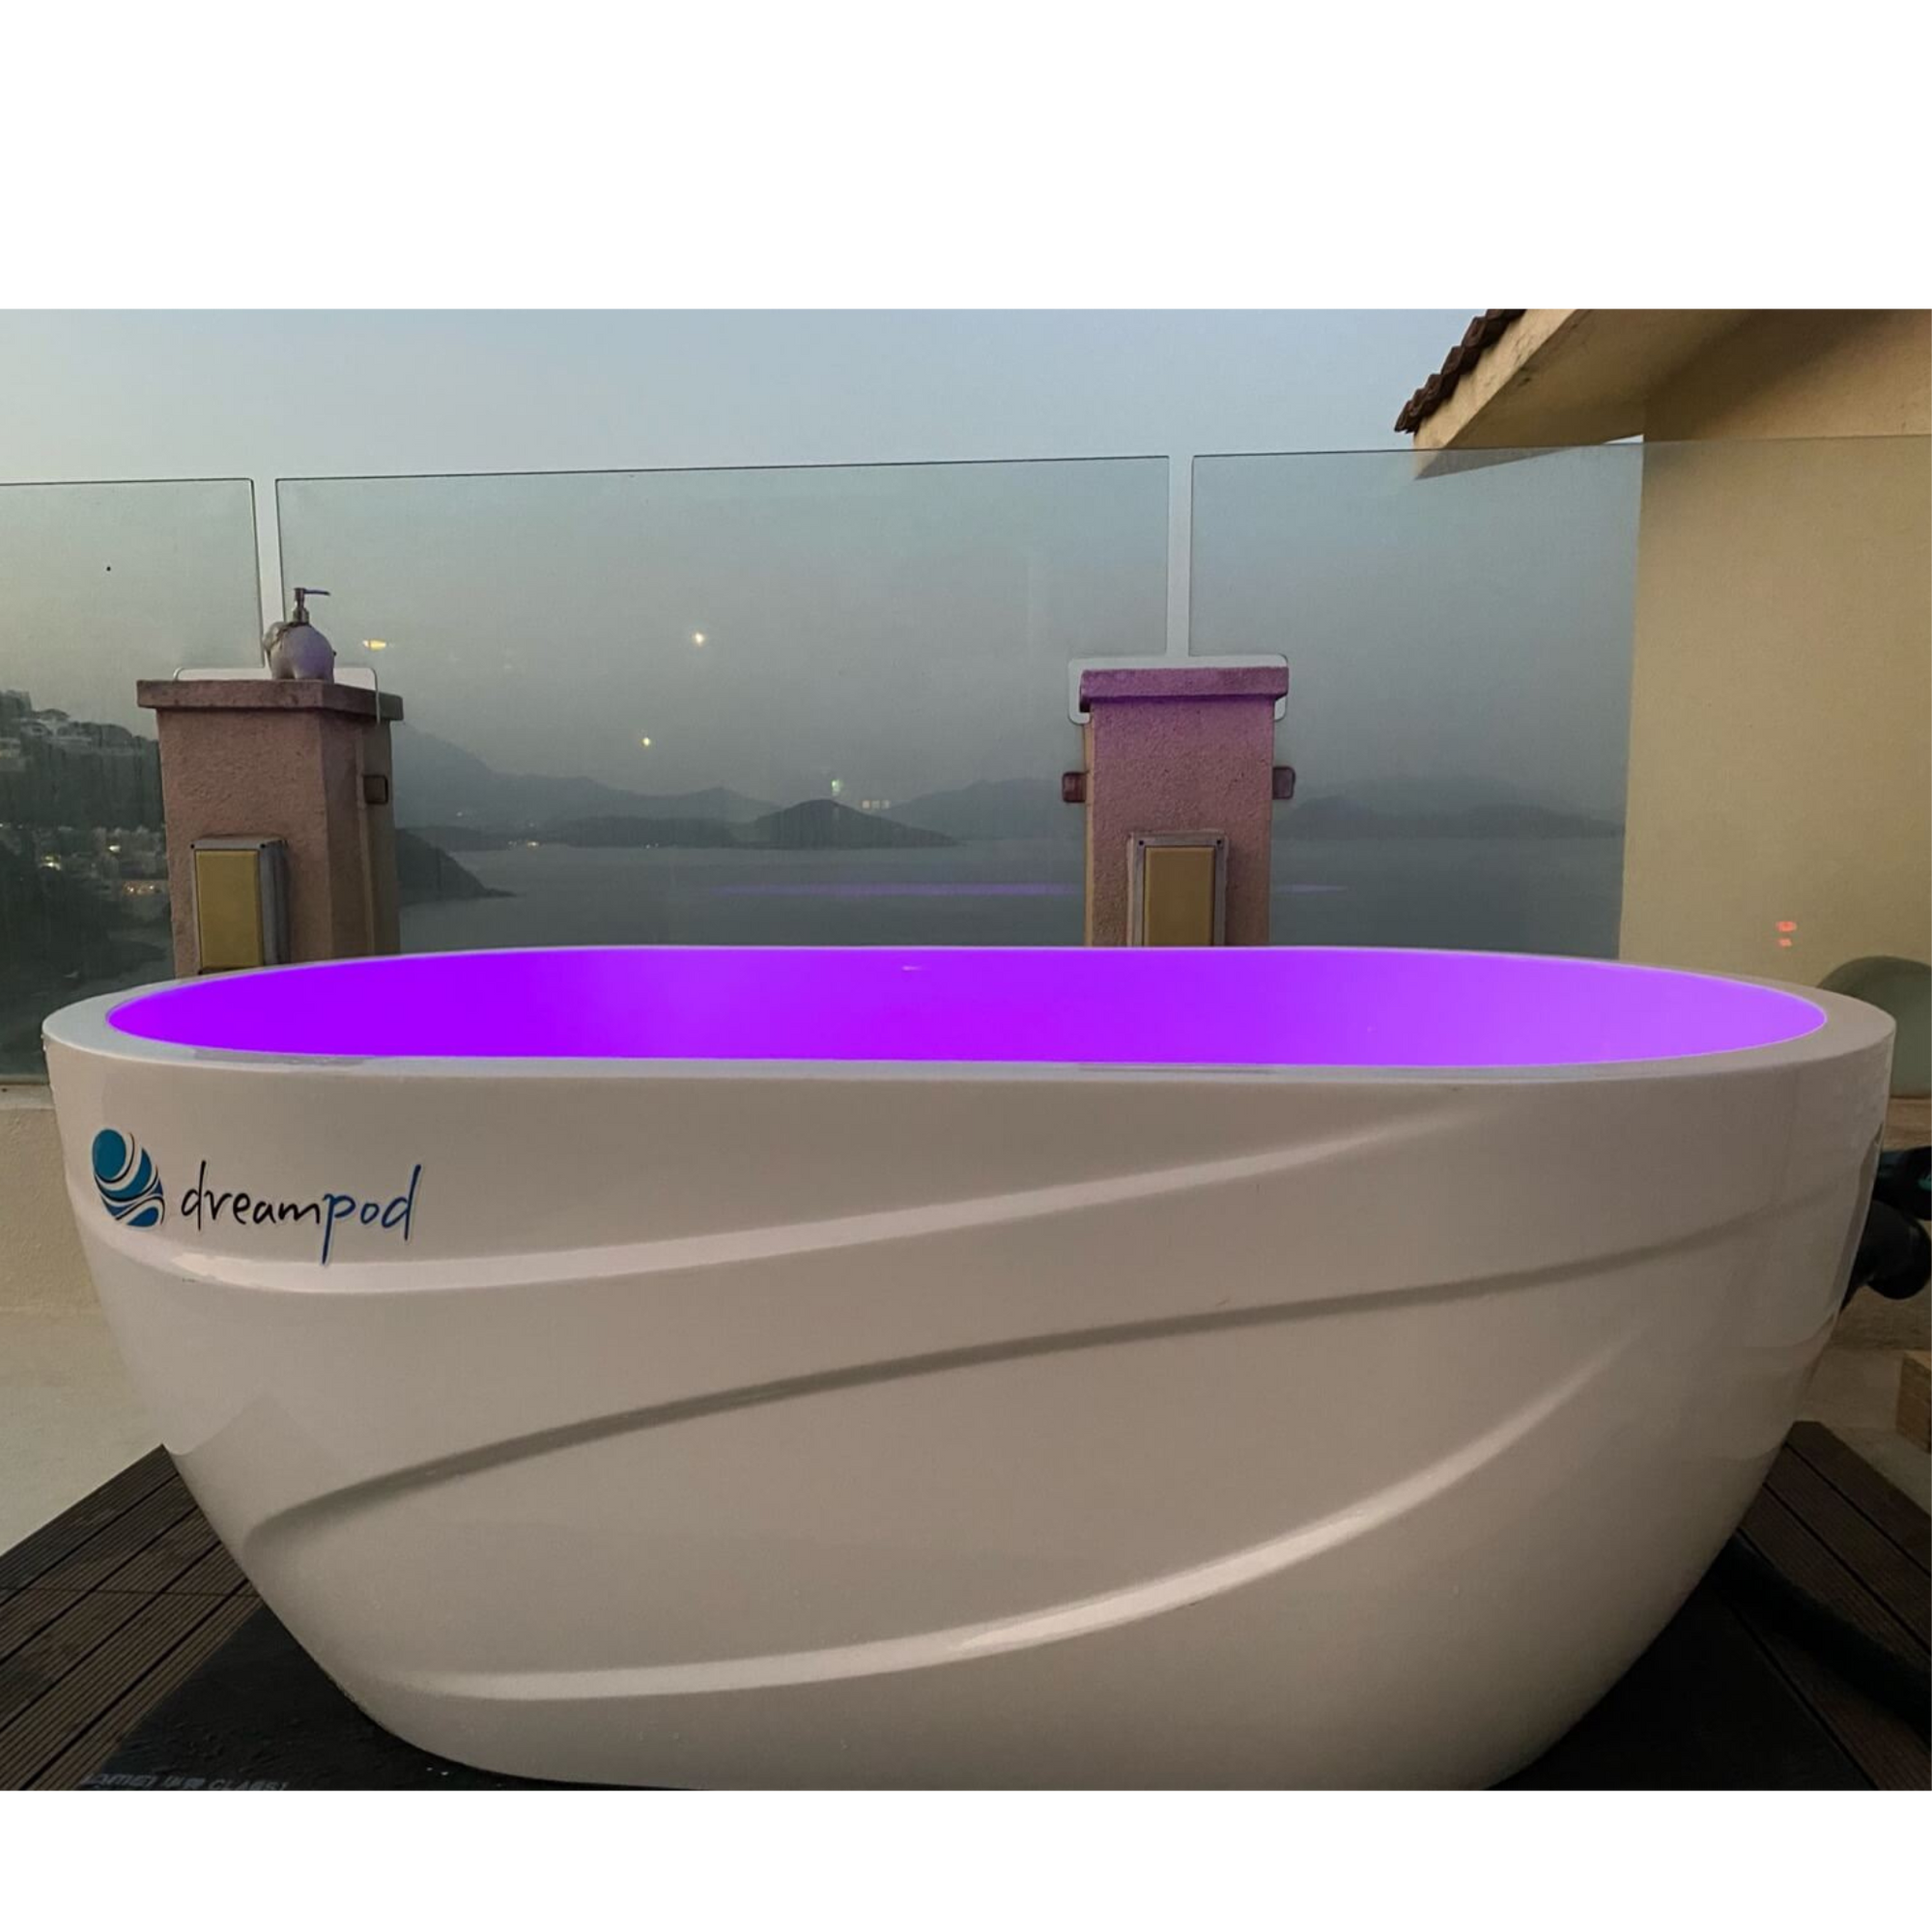 Dreampod Ice Bath with Chiller